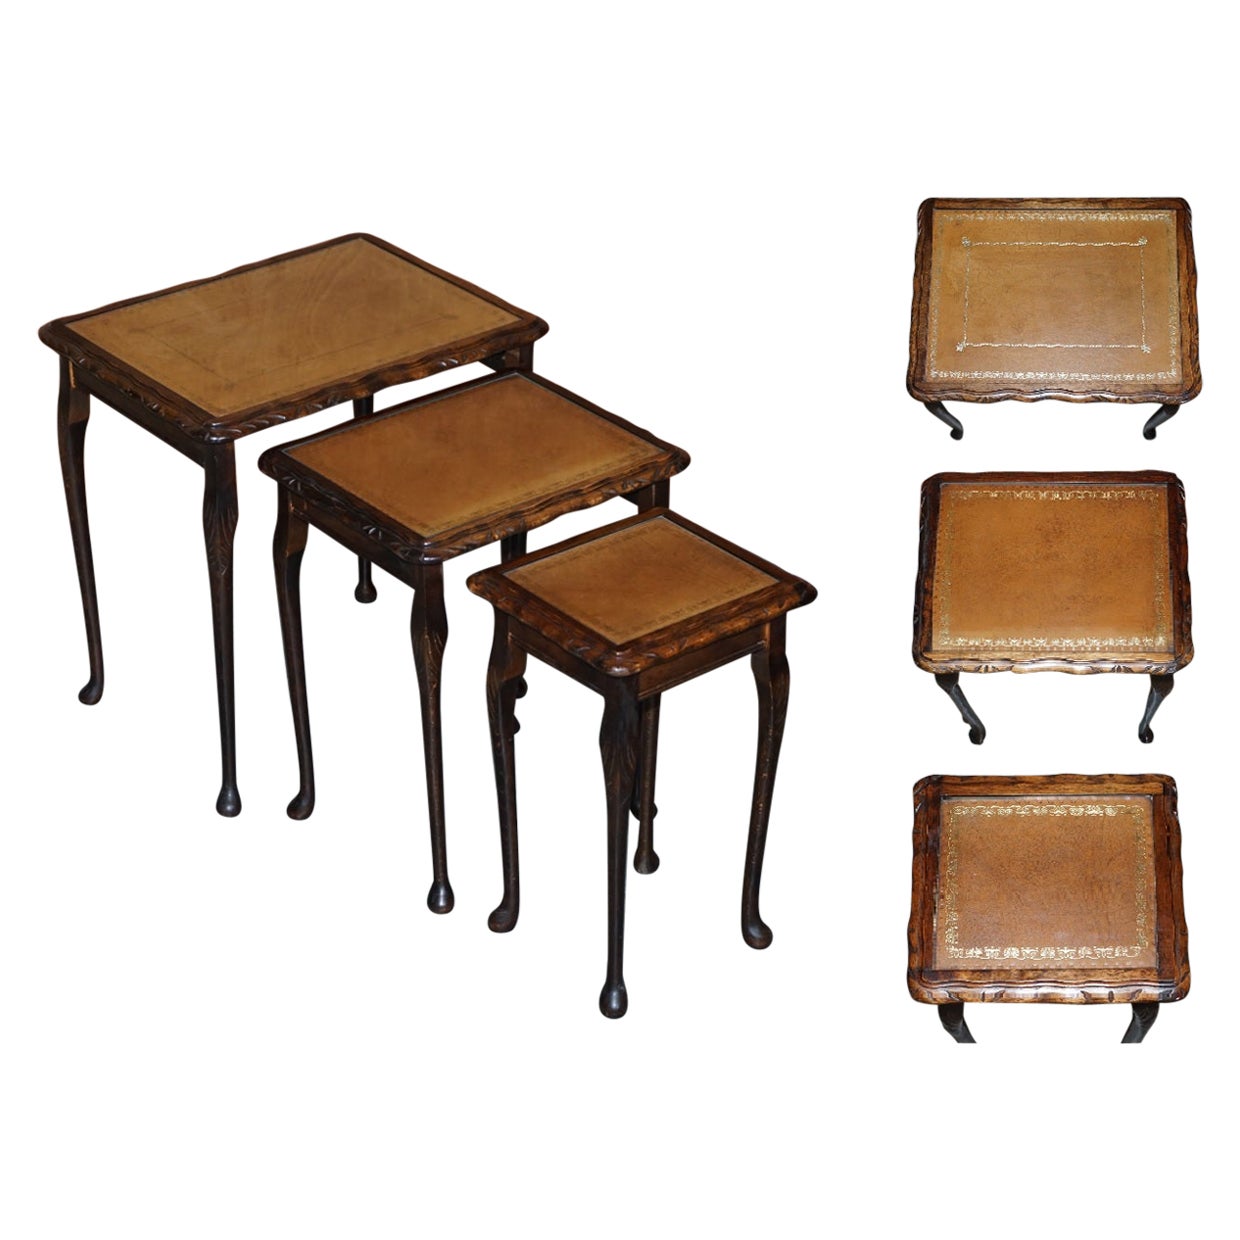 Vintage Nest of Three Hardwood with Gold Leaf Embossed Brown Leather Tops Tables For Sale